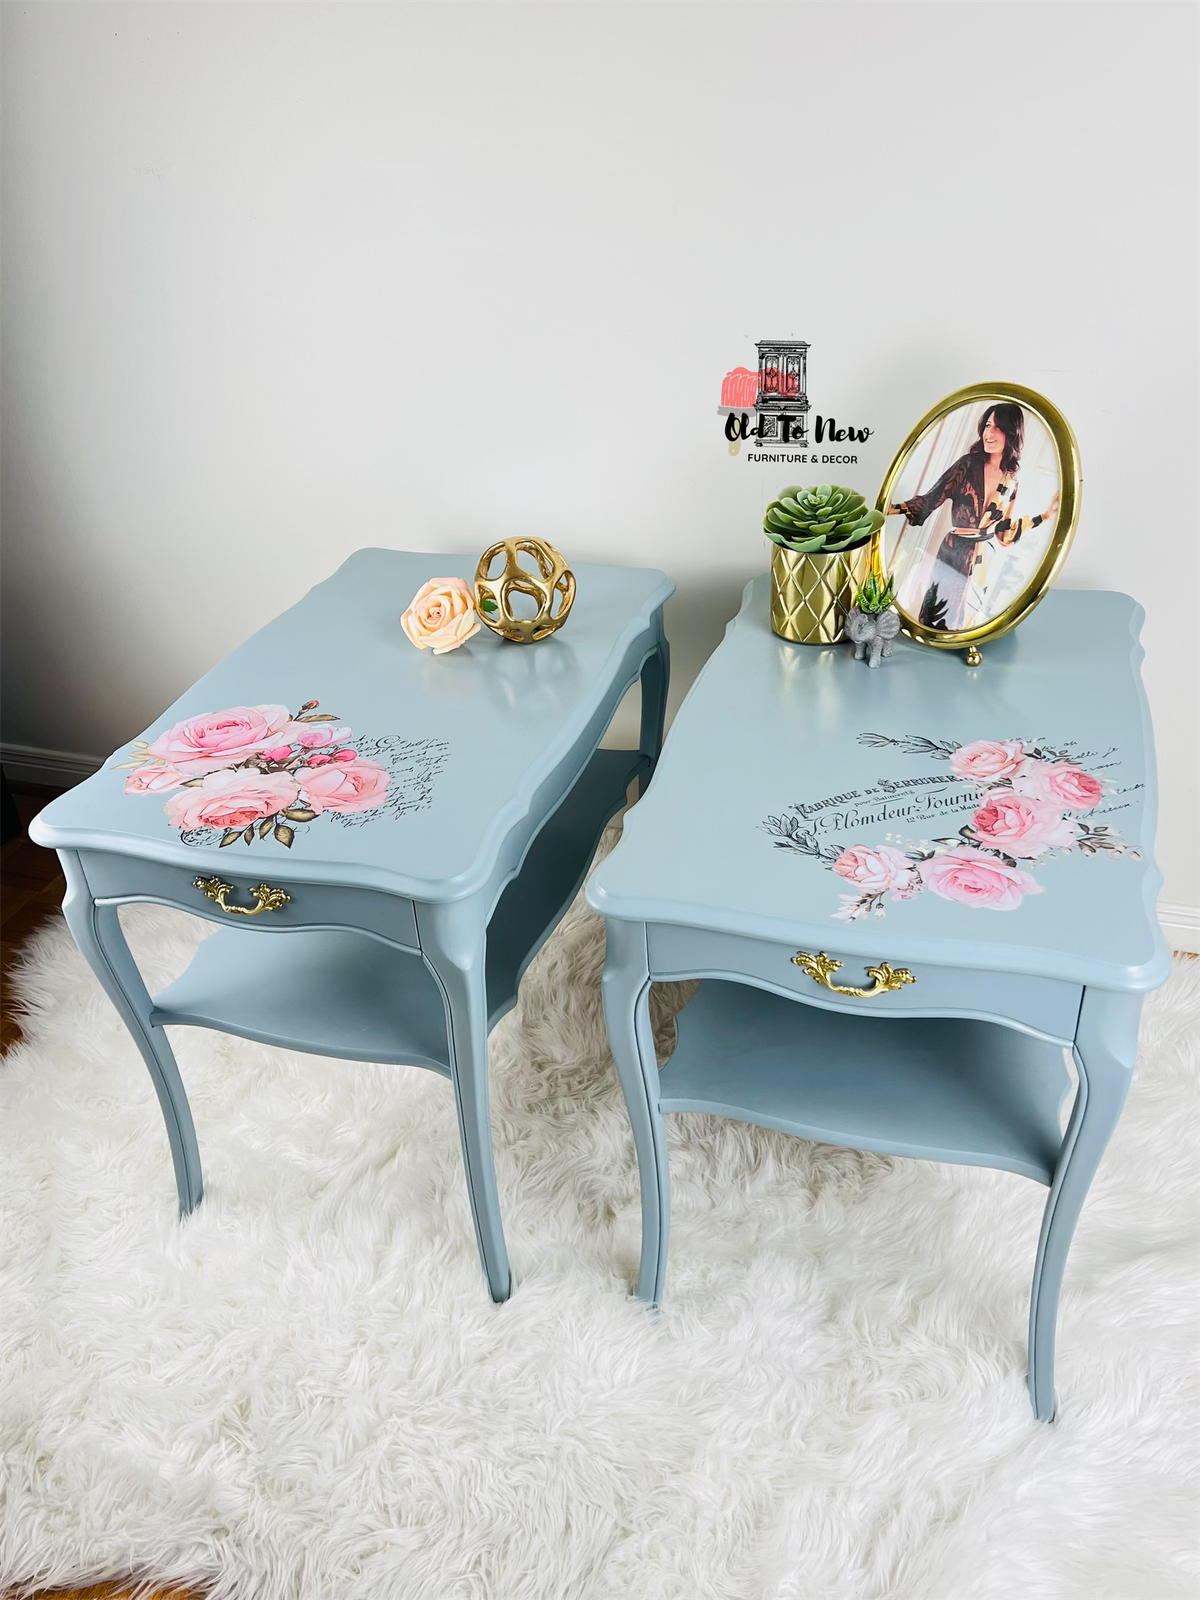 Soldi Wood End Tables with Storage,  Light Blue Color, Old to New Furniture & Decor